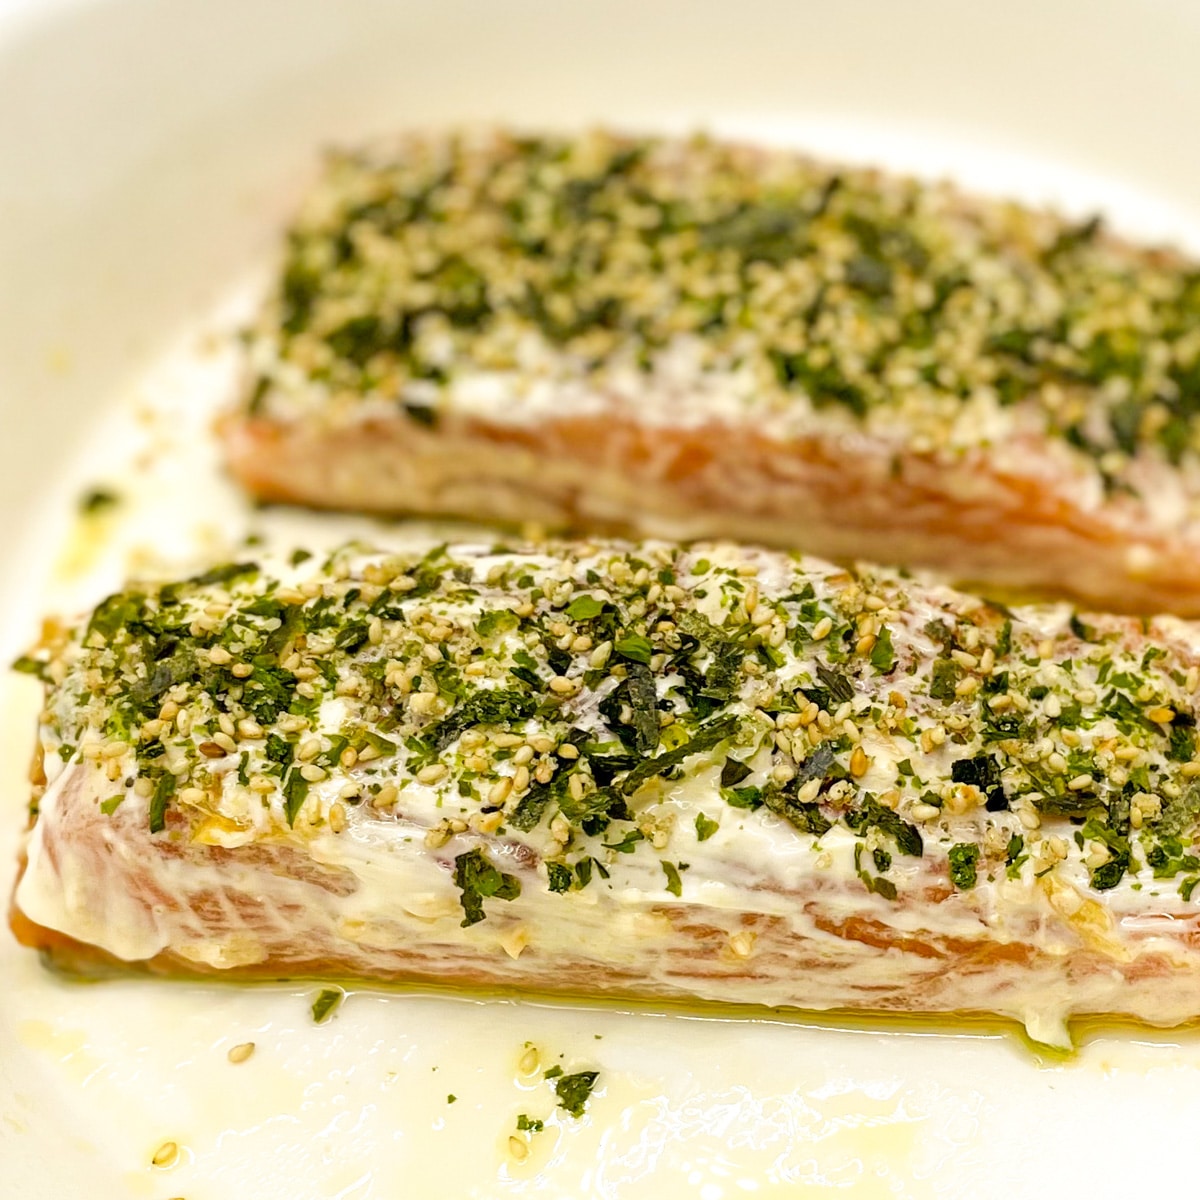 Two salmon fillets coated in mayonnaise with furikake seasoning sprinkled over top